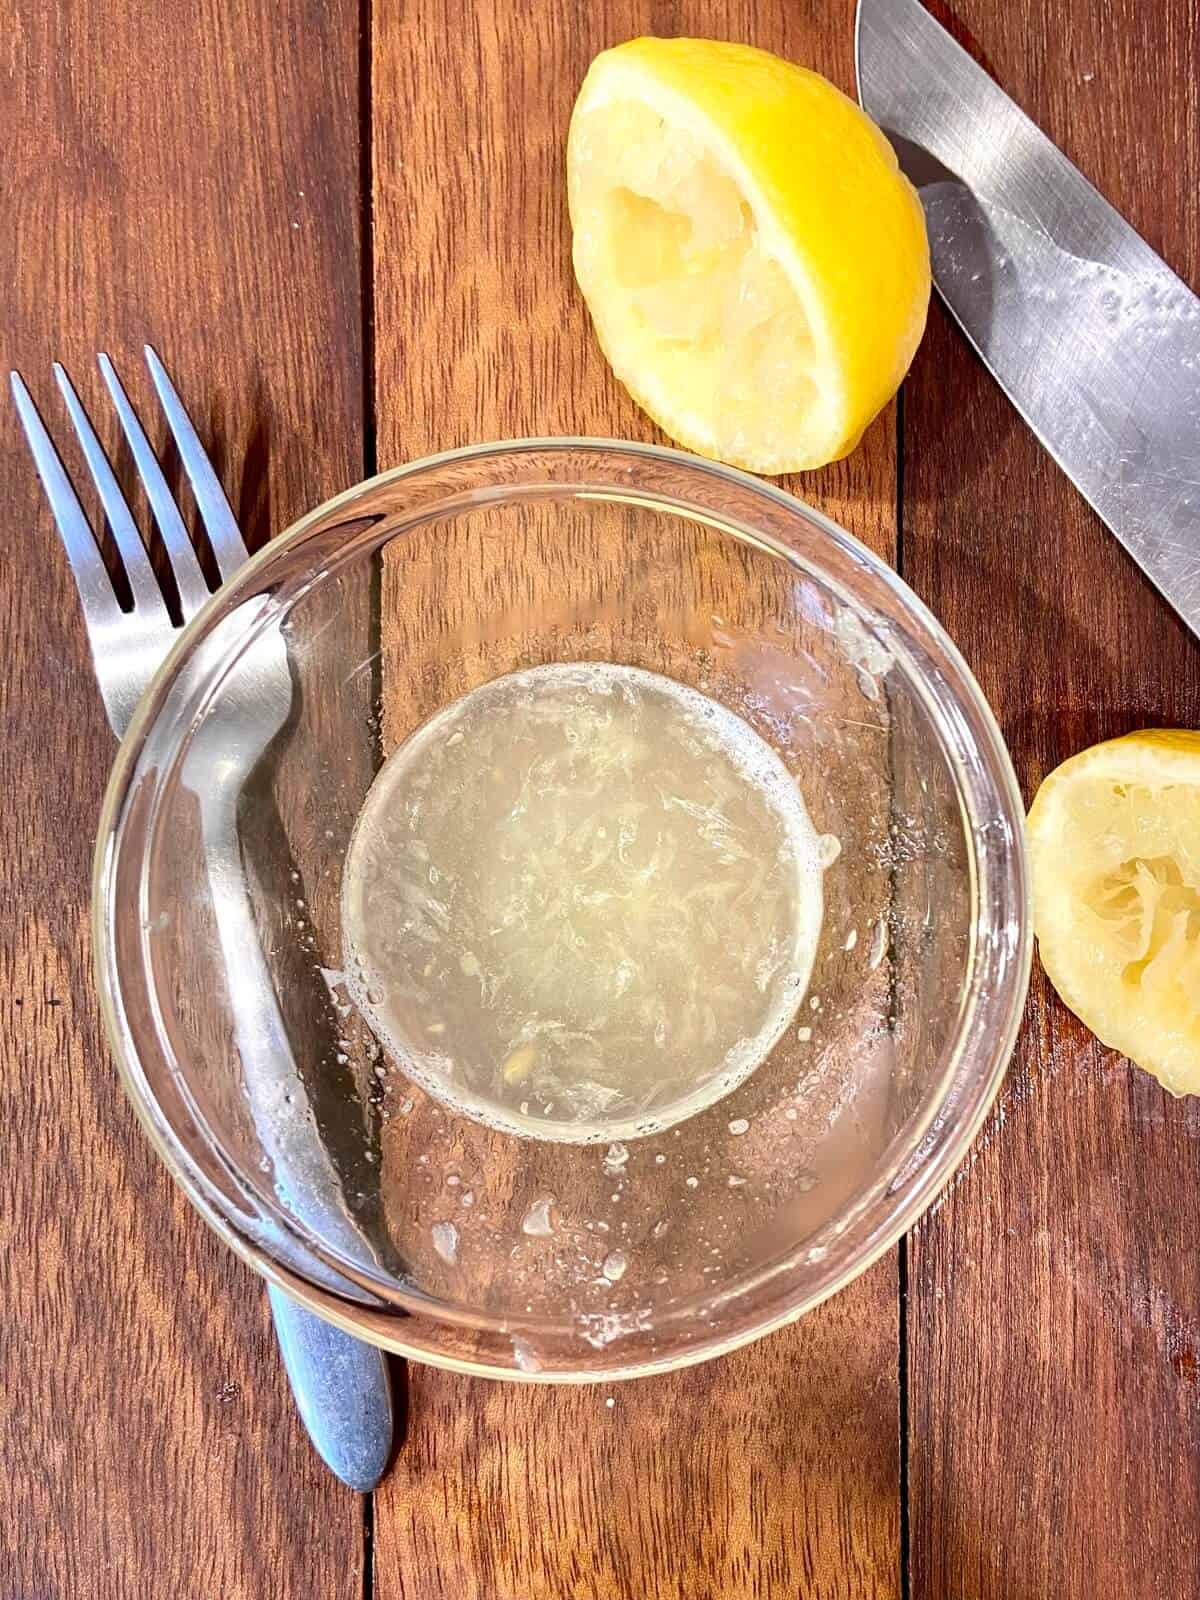 Lemon juice squeezed into a small bowl, with fork and knife on table.